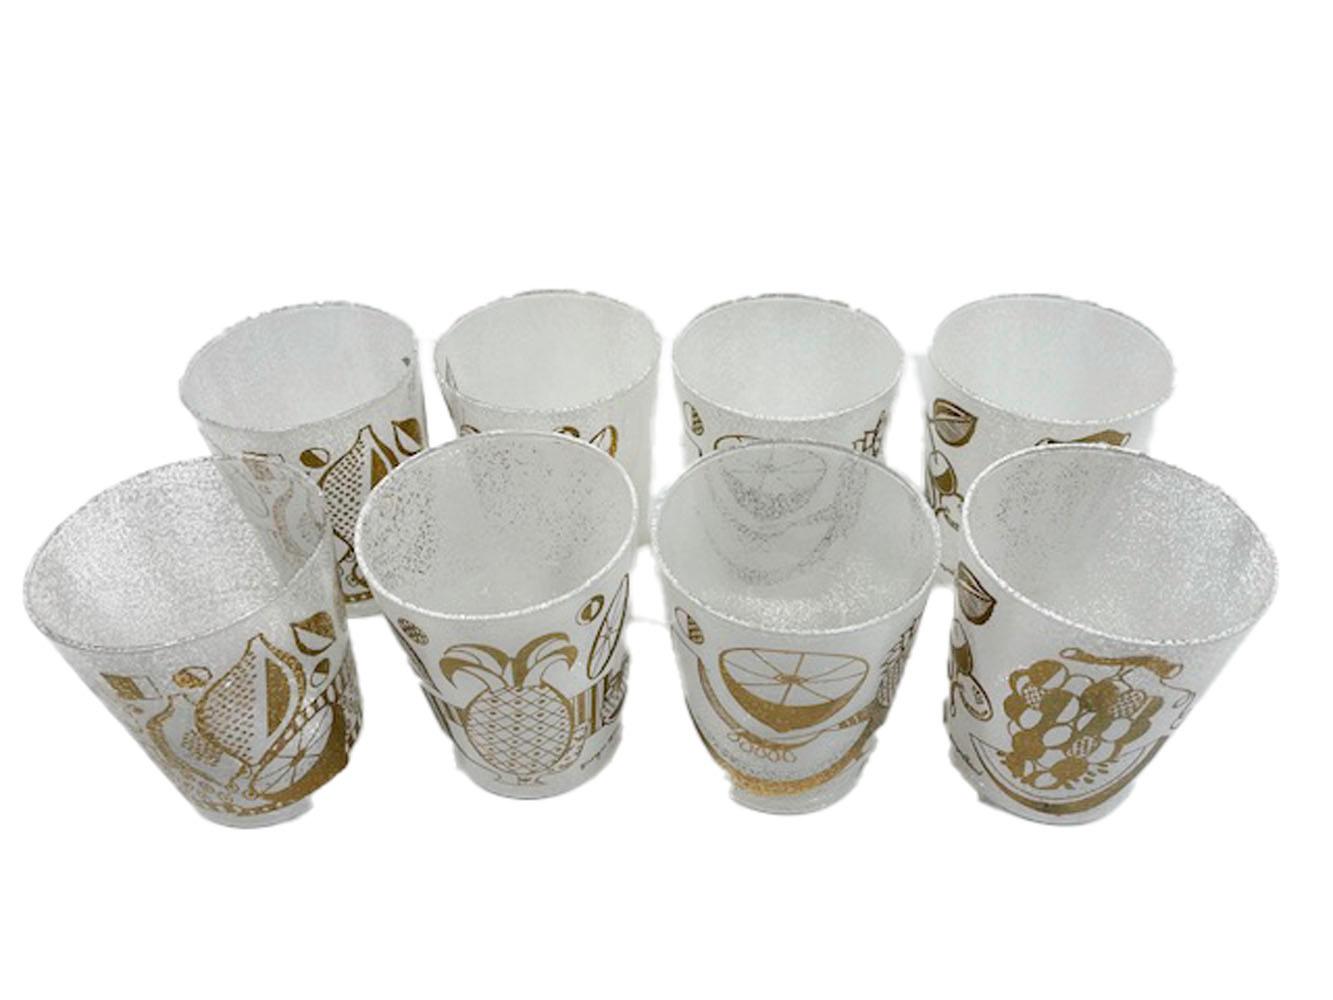 Mid-Century Modern 9 piece pitcher and double old fashioned cocktail set in the Ambrosia pattern, also called Nectar of the Gods by Georges Briard. Clear glass with white spattered exterior and 22k gold decoration, The pitcher featuring a pineapple